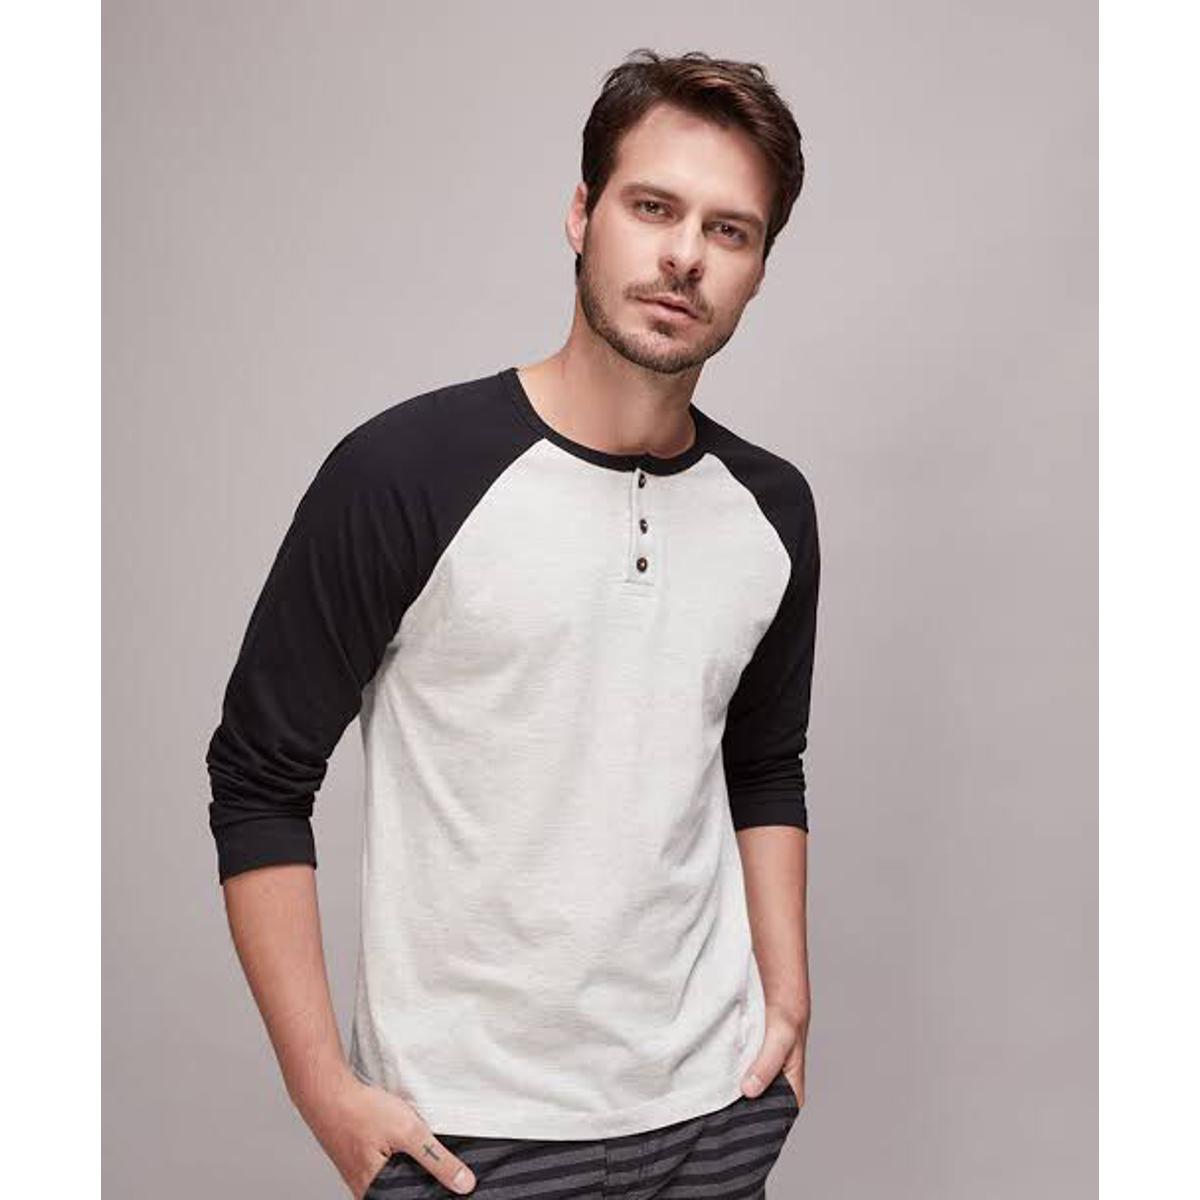 Pack of 4] Raglan 2 colors button Full sleeves T shirts for men and women  Random Colors